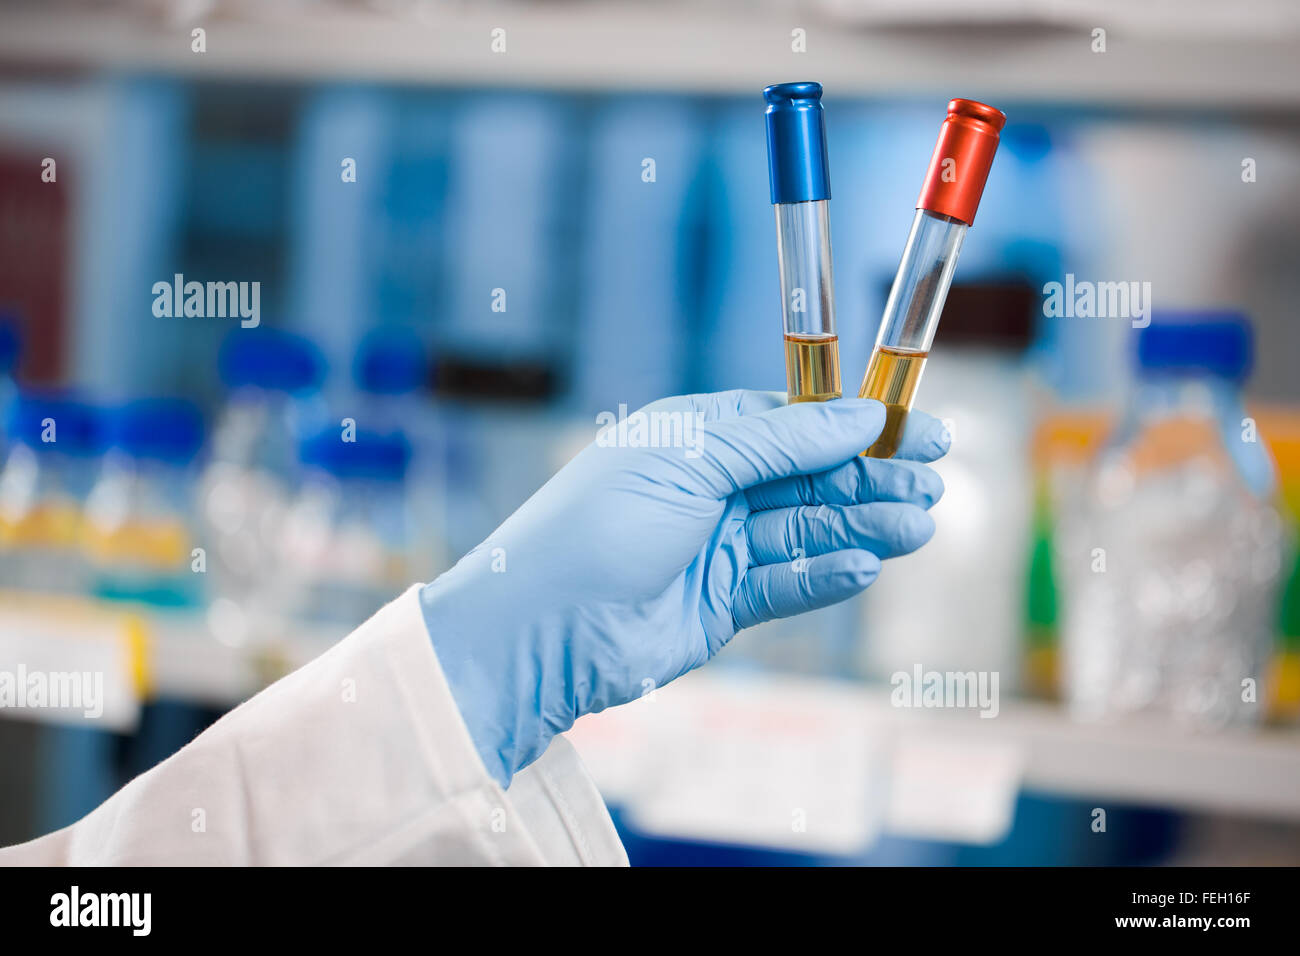 Landscape shot, choice, victory, scientist holding red and blue vials or test tubes Stock Photo